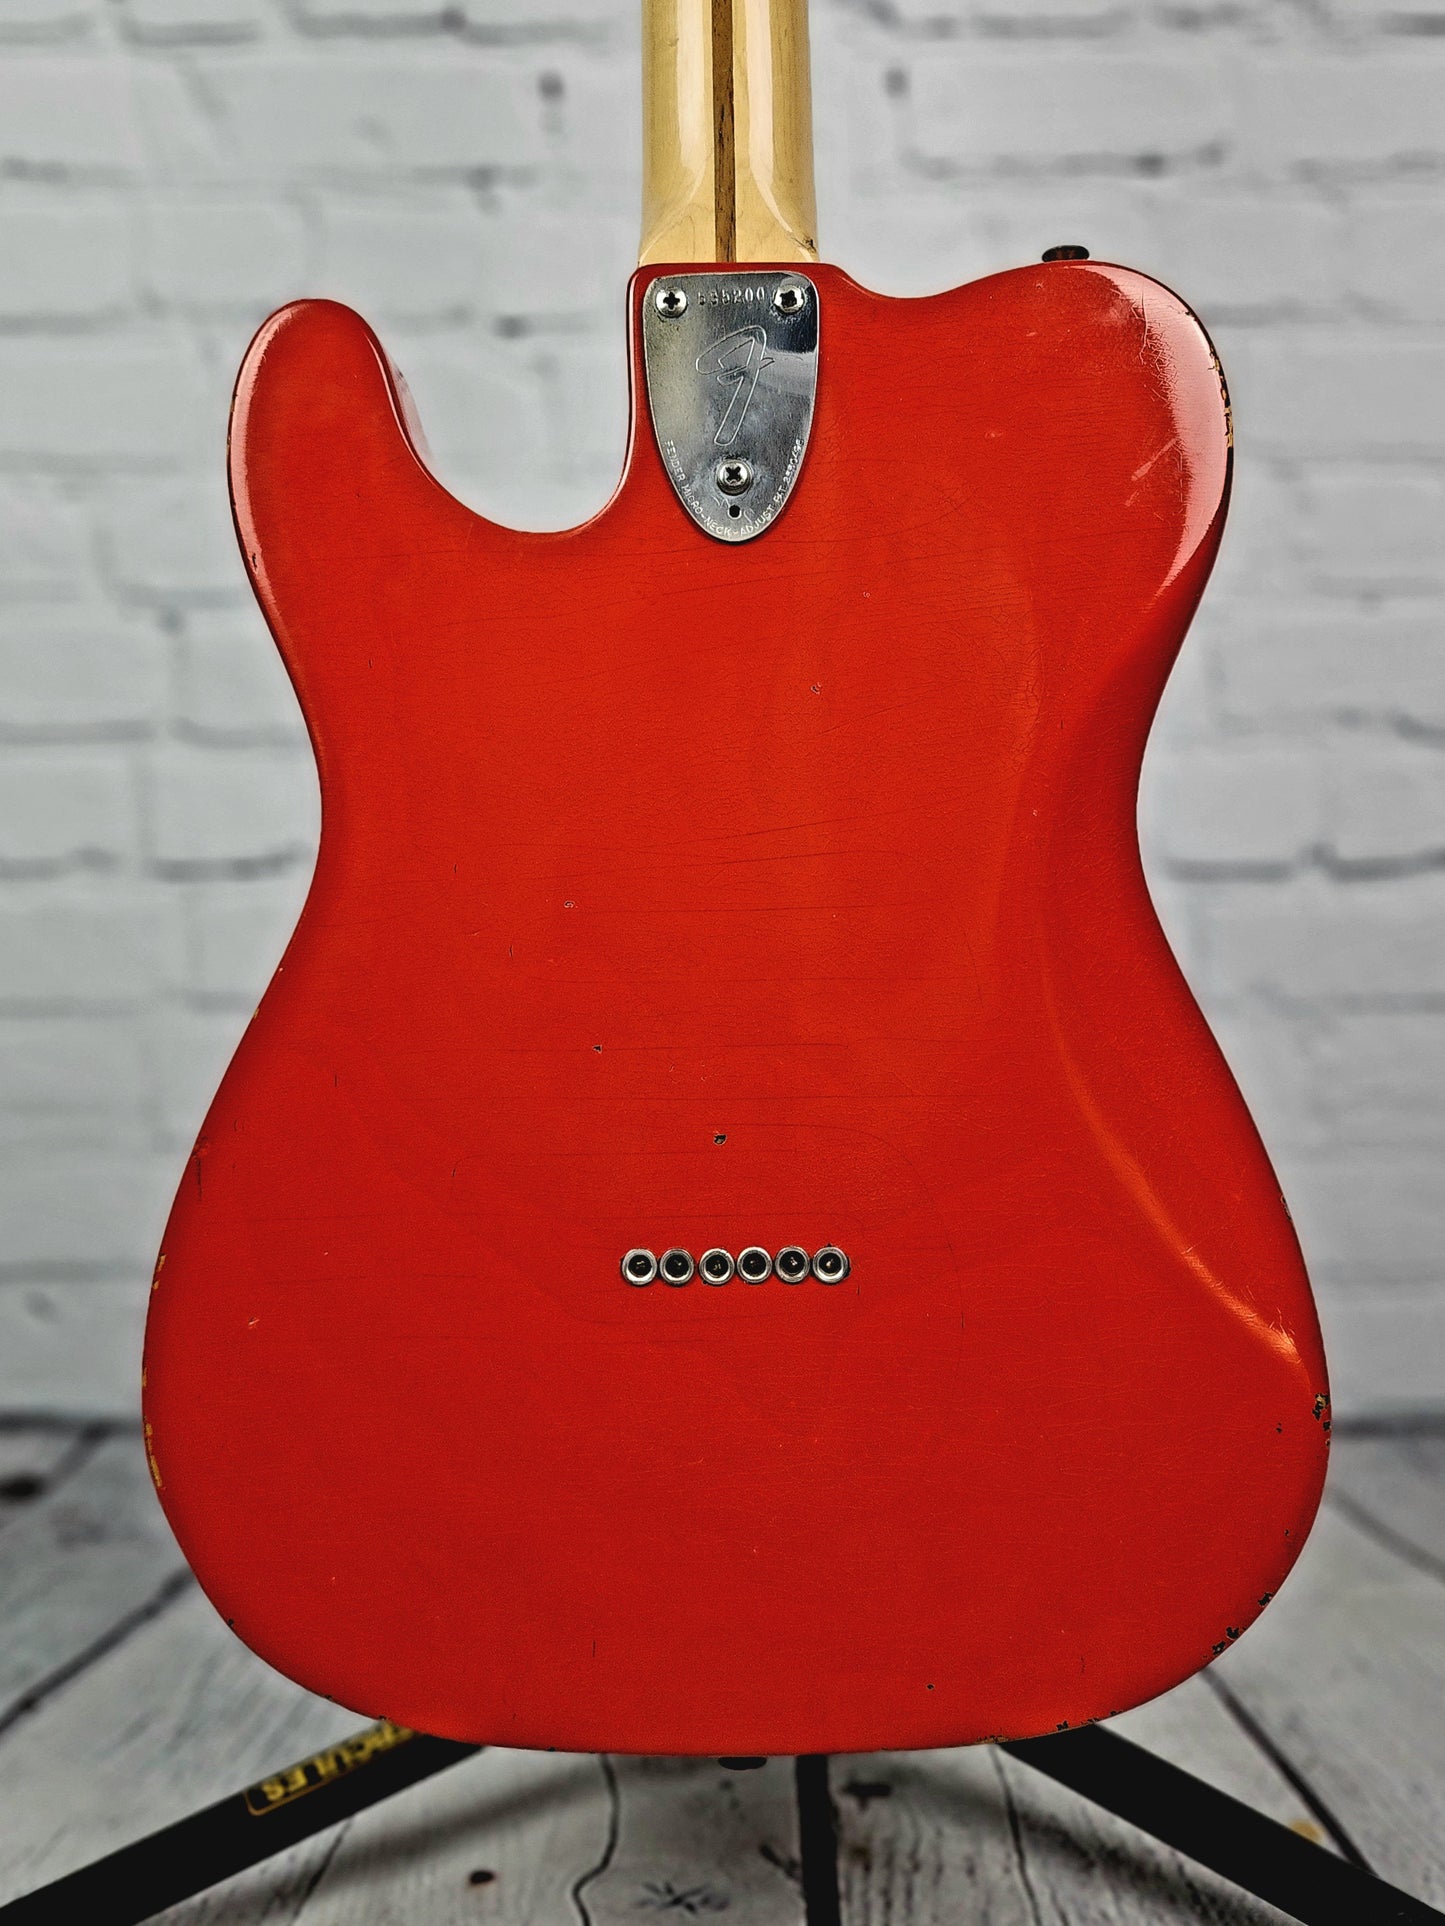 USED 1974 Fender Telecaster Deluxe Electric Guitar Refinish Fiesta Red